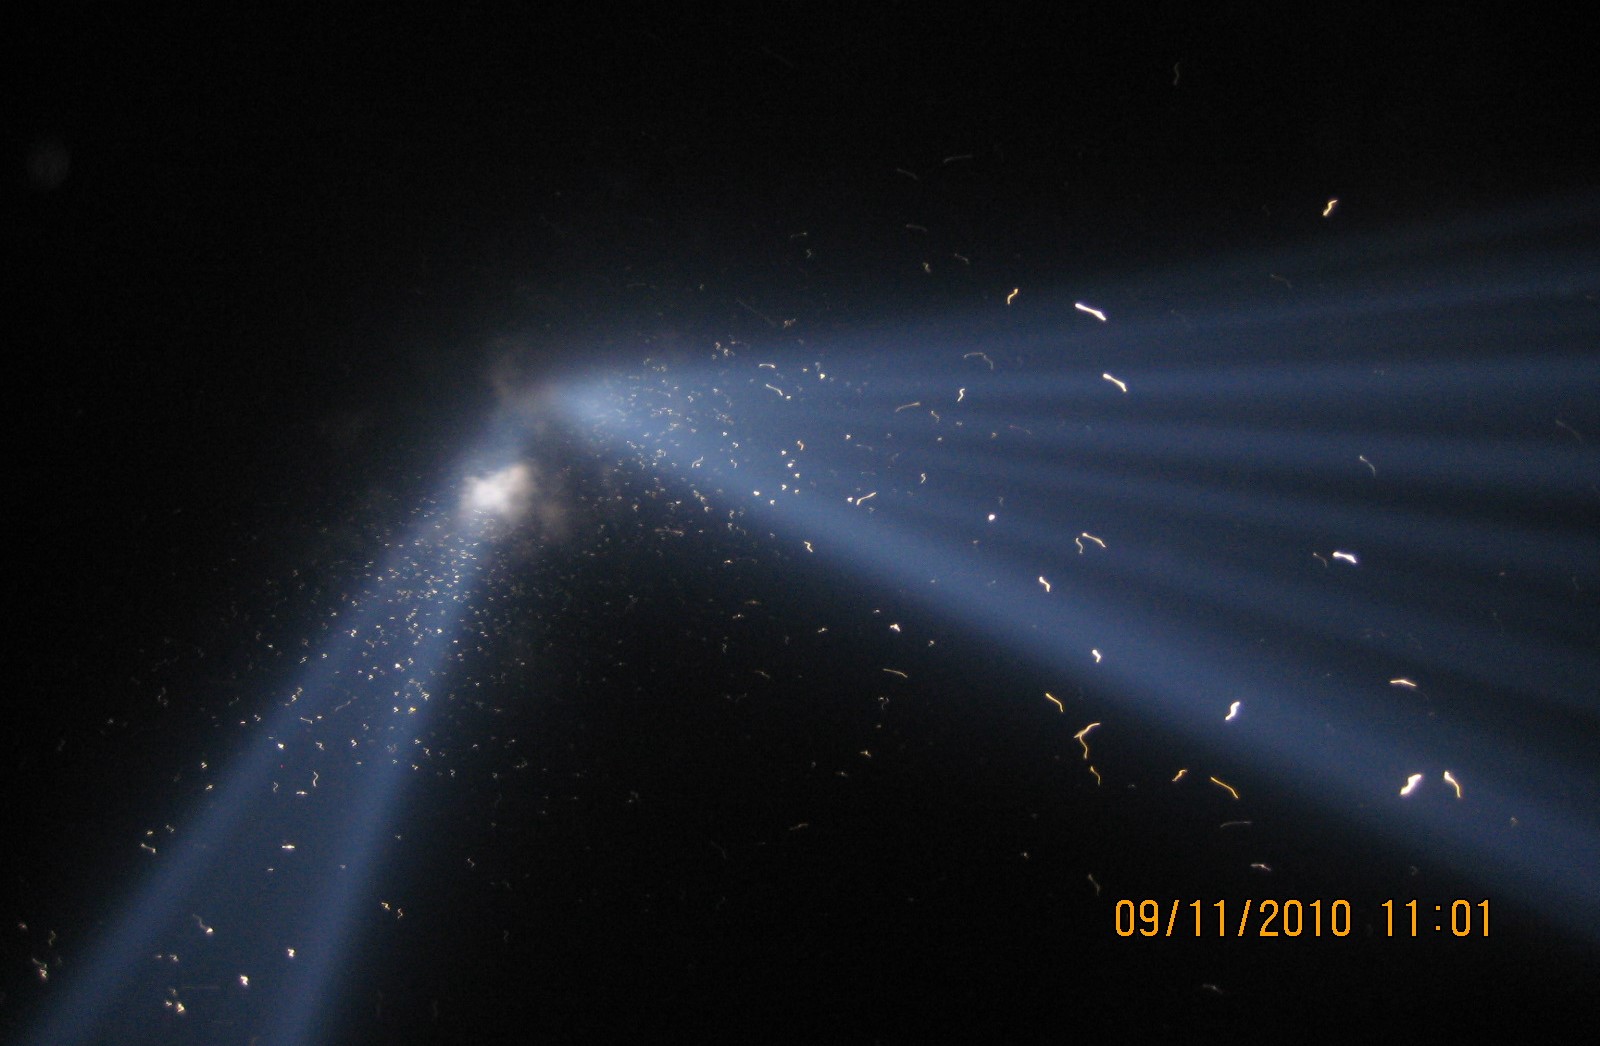 In 2010, thousands of birds became trapped in the powerful beams of the Tribute in Light. Photo: NYC Audubon